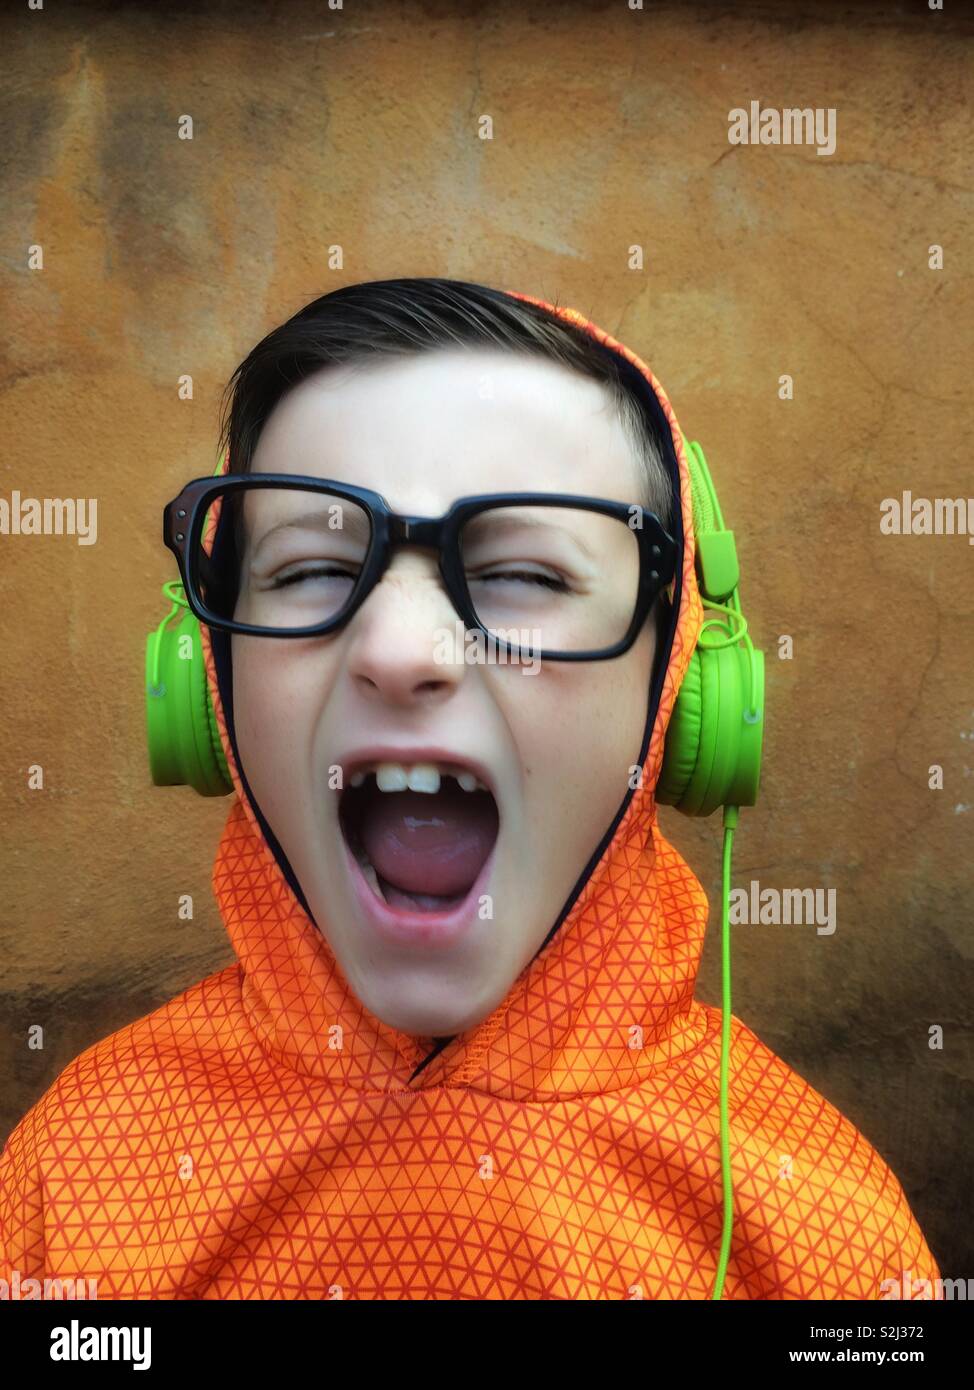 Young boy with black glasses listening and singing to music on stereo headphones Stock Photo